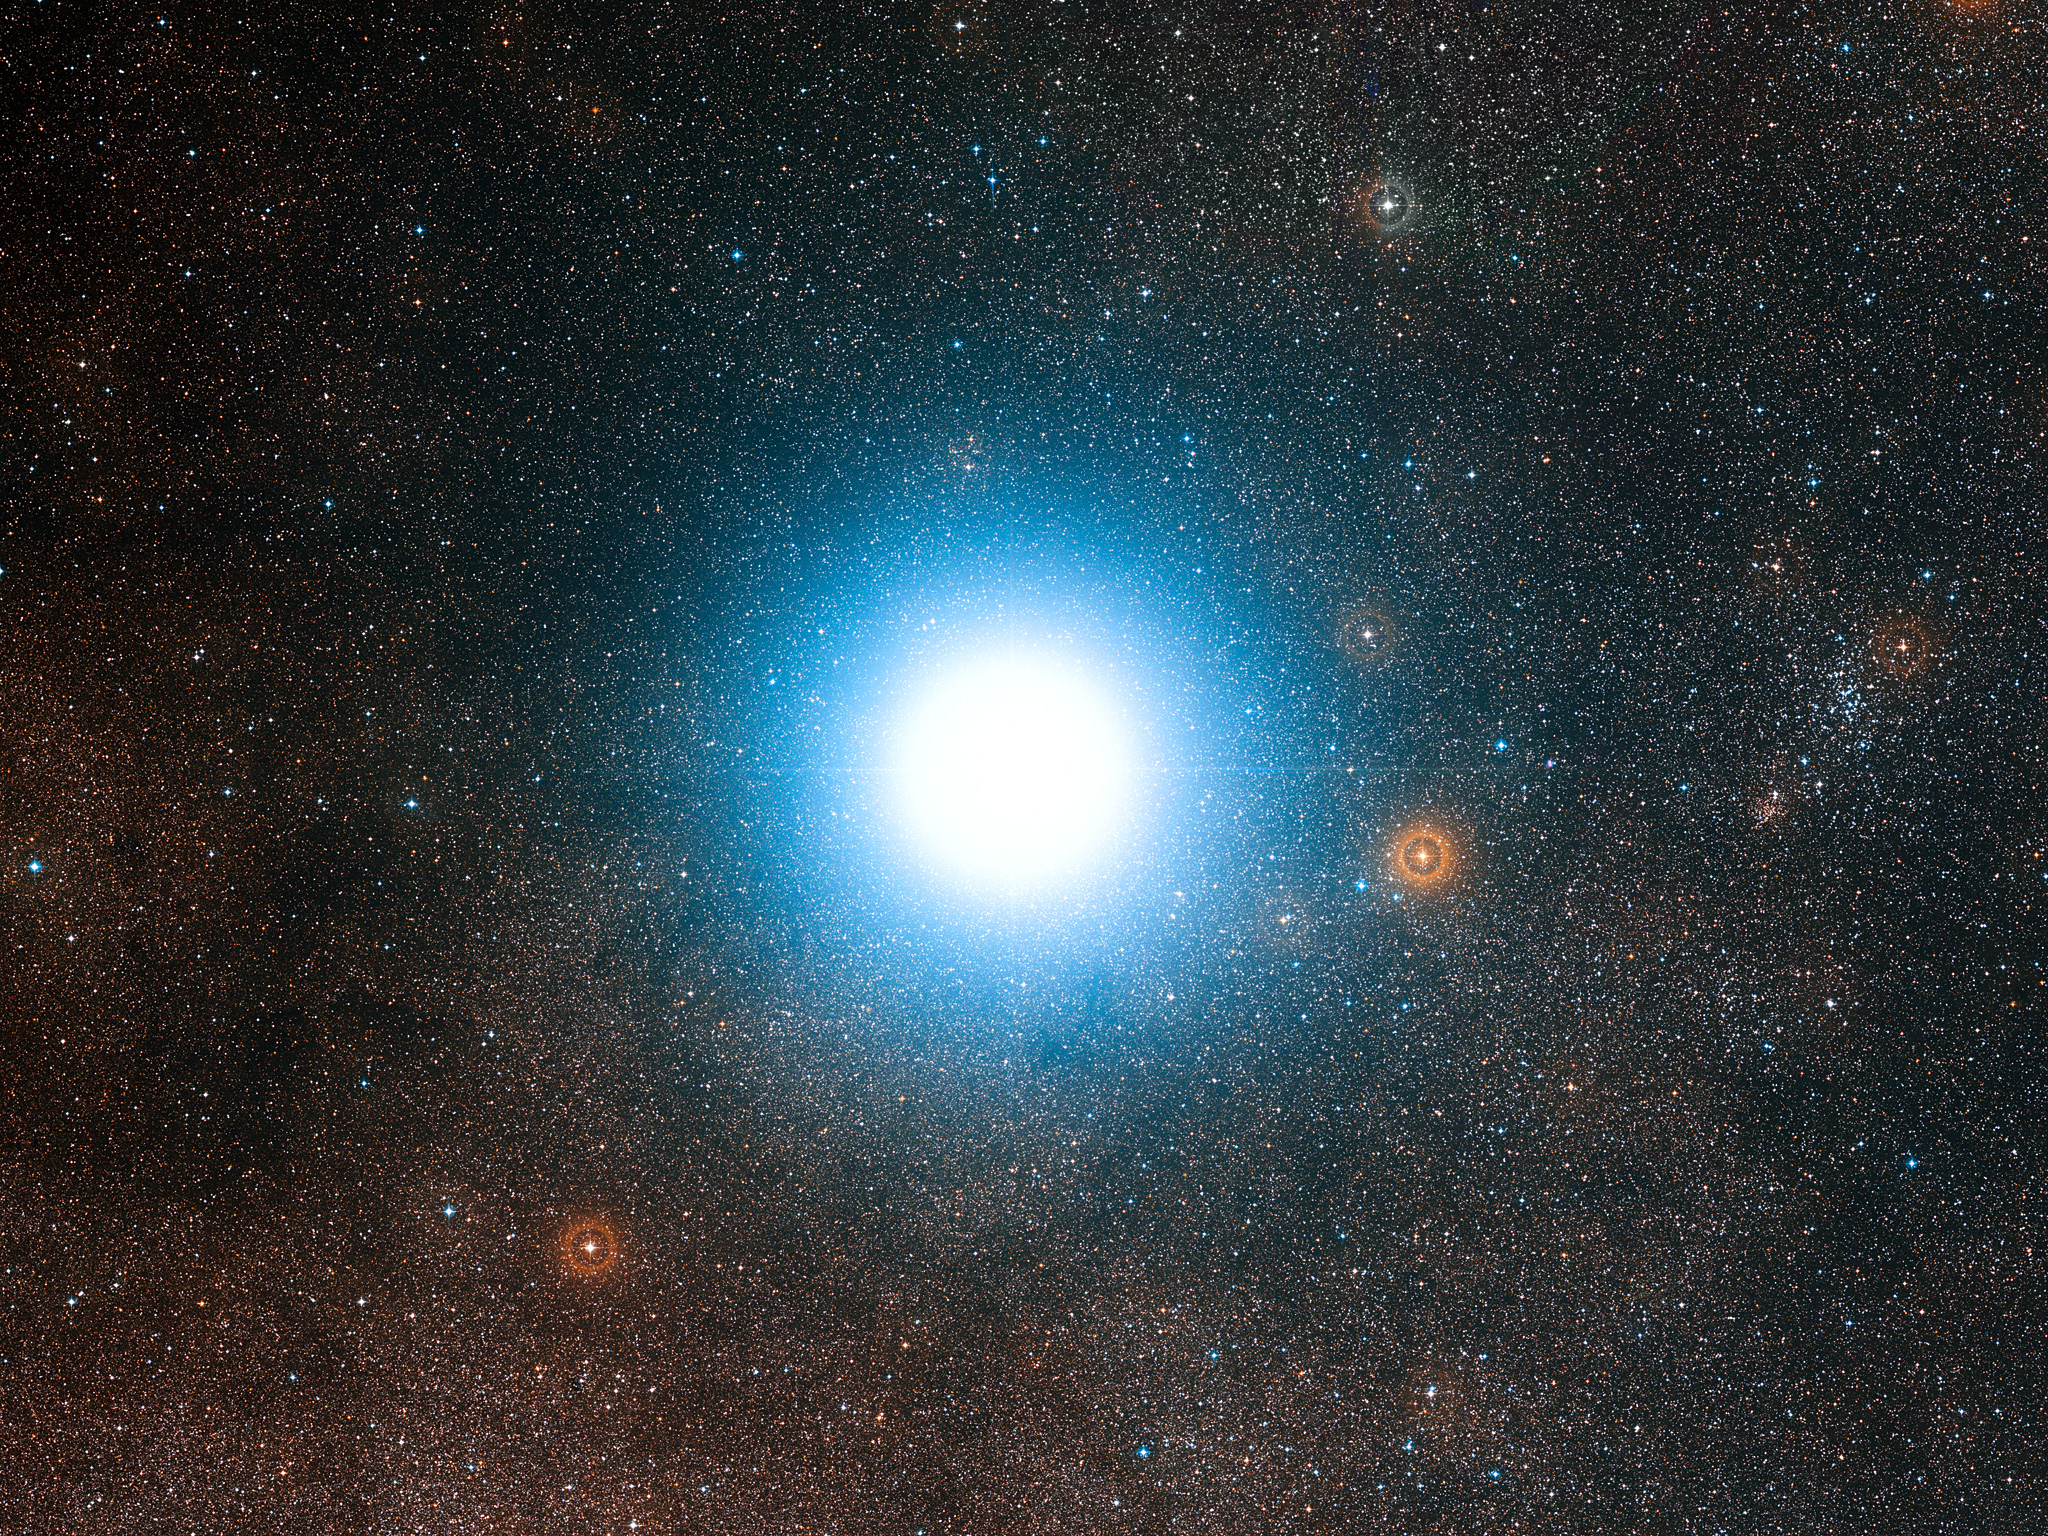 A bright star in the center of the image, with two dimmer red stars below it.